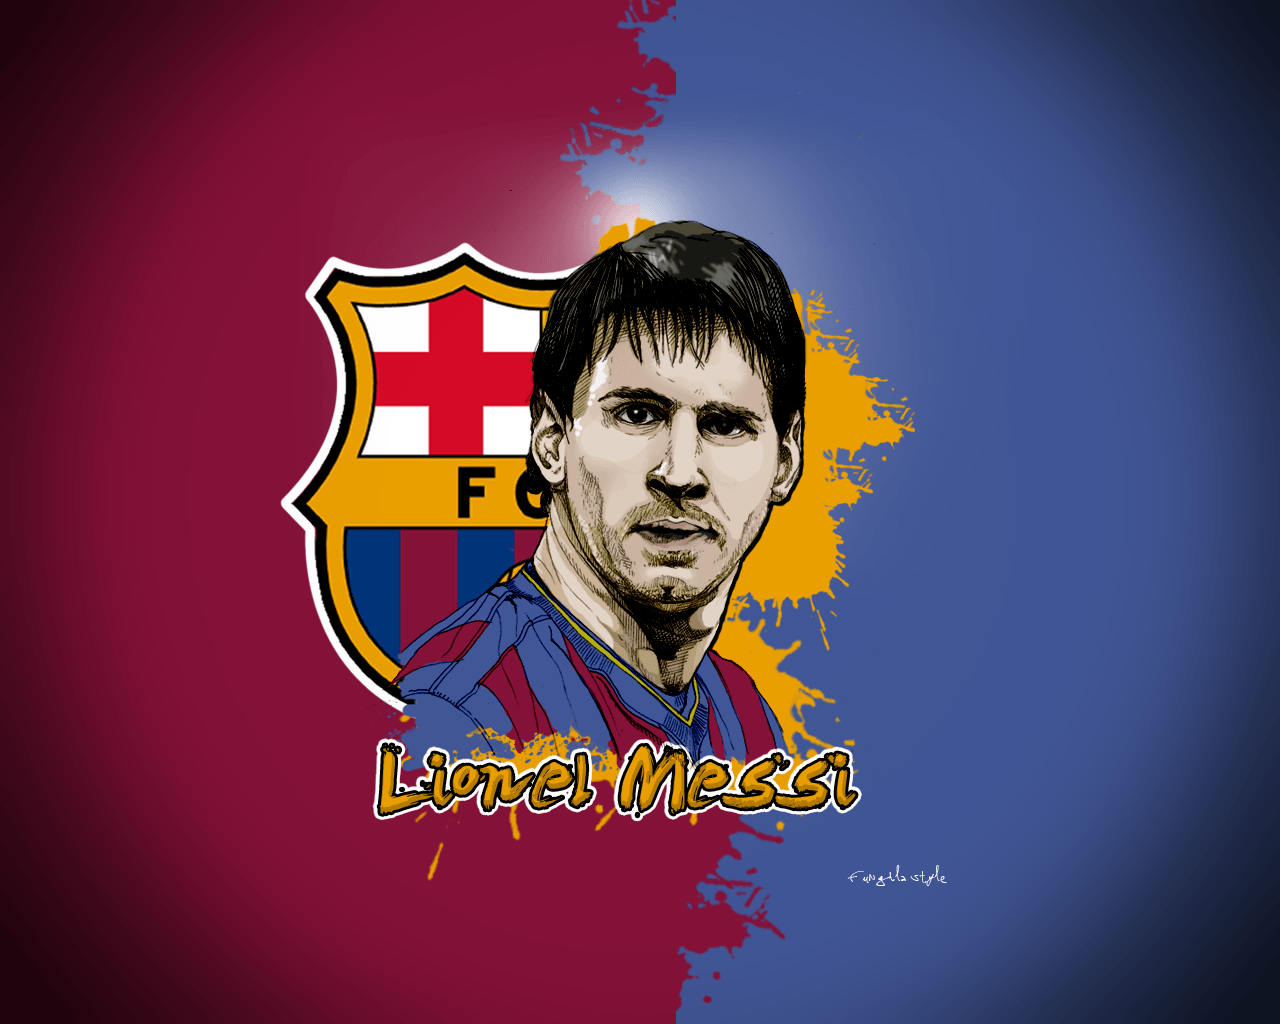 image about Lionel Messi Wallpaper. Messi